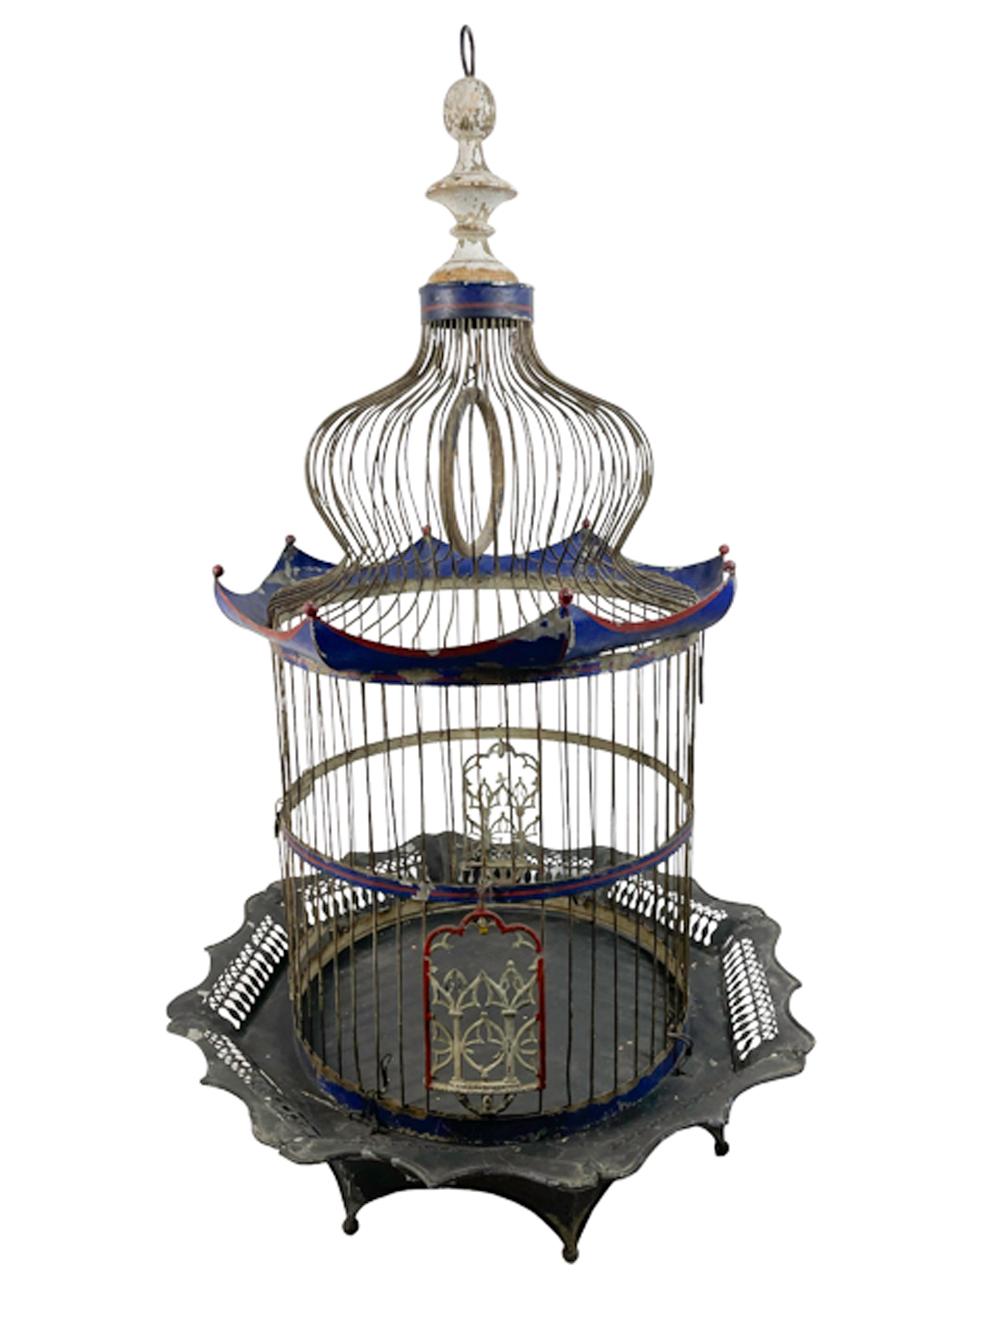 19thc Painted Sheet Metal and Wire Birdcage John Maxheimer, New York, NY, 1885 For Sale 1